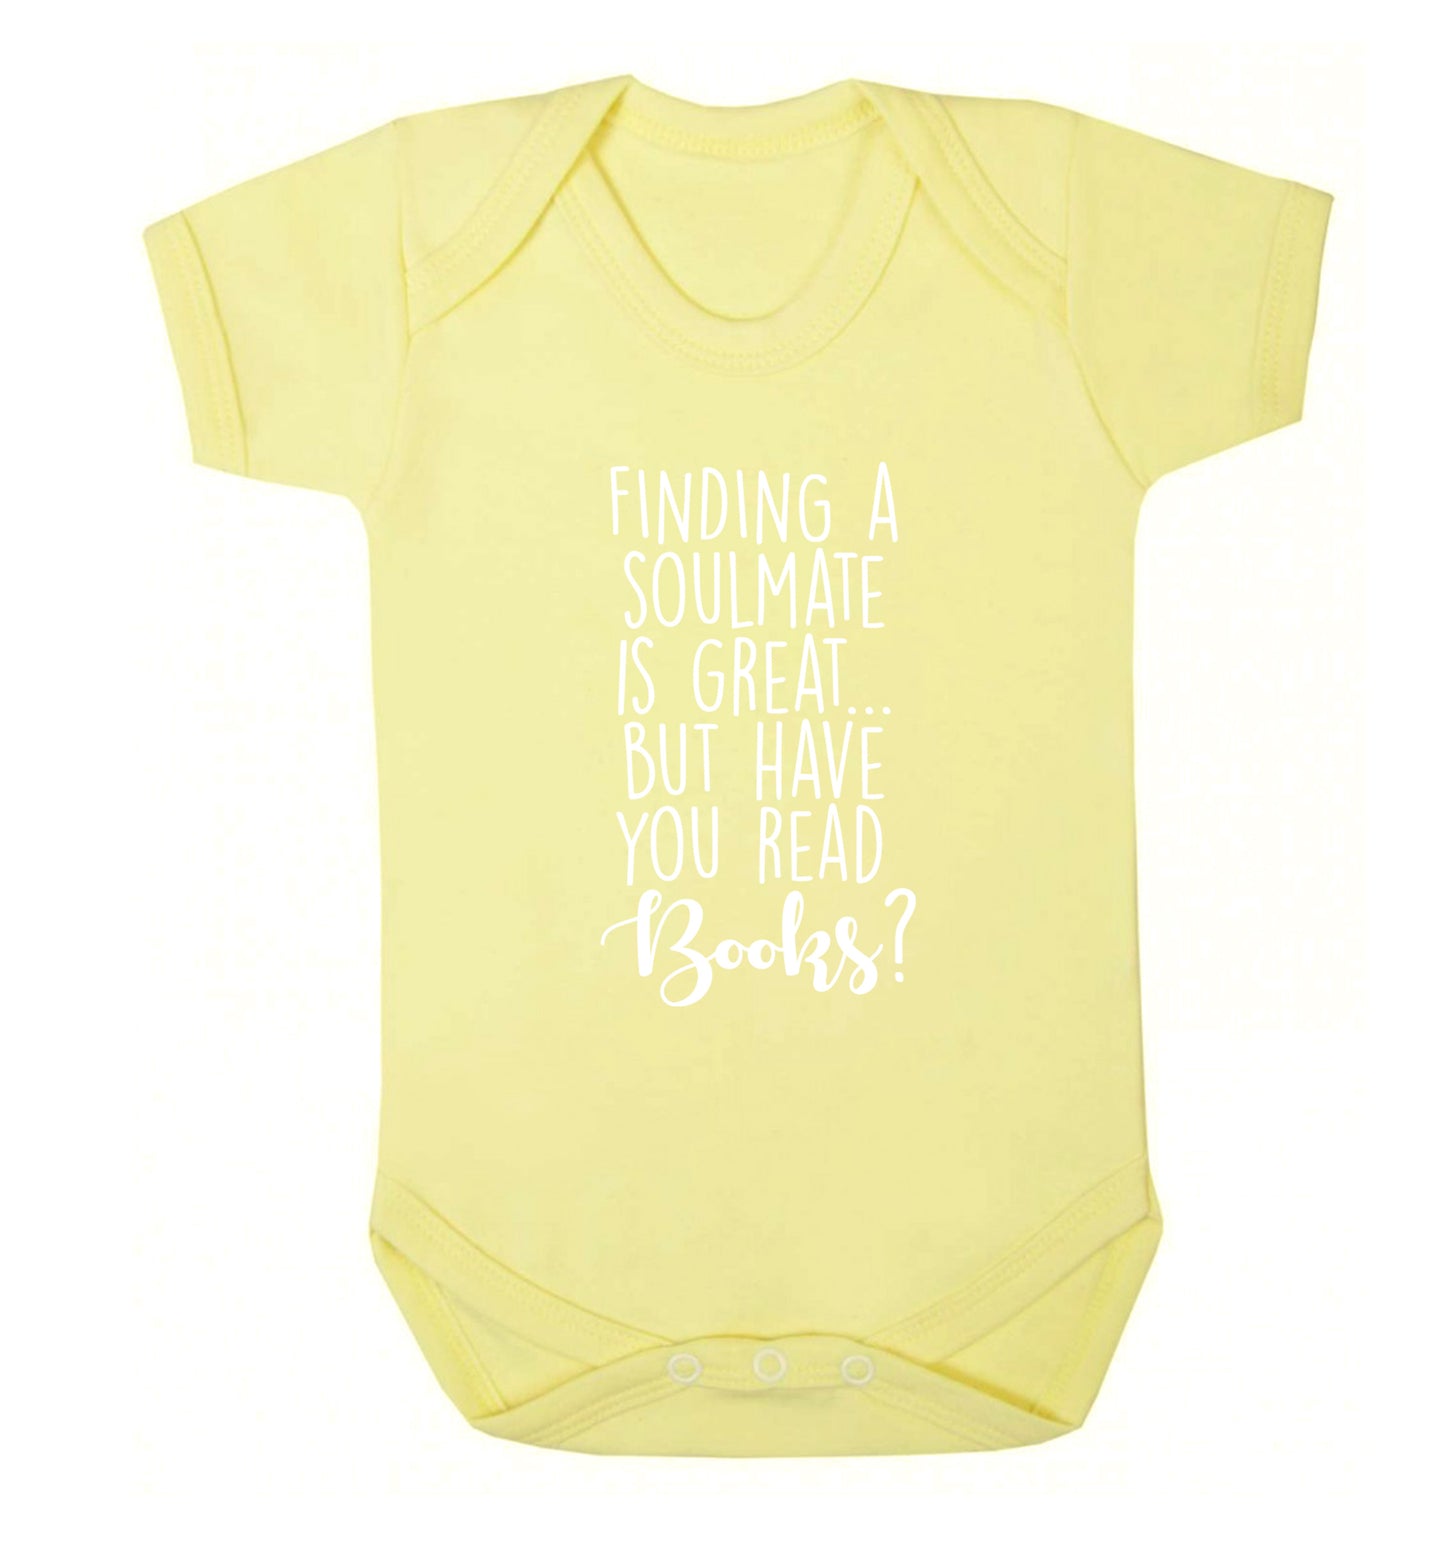 Finding a soulmate is great but have you read books? Baby Vest pale yellow 18-24 months